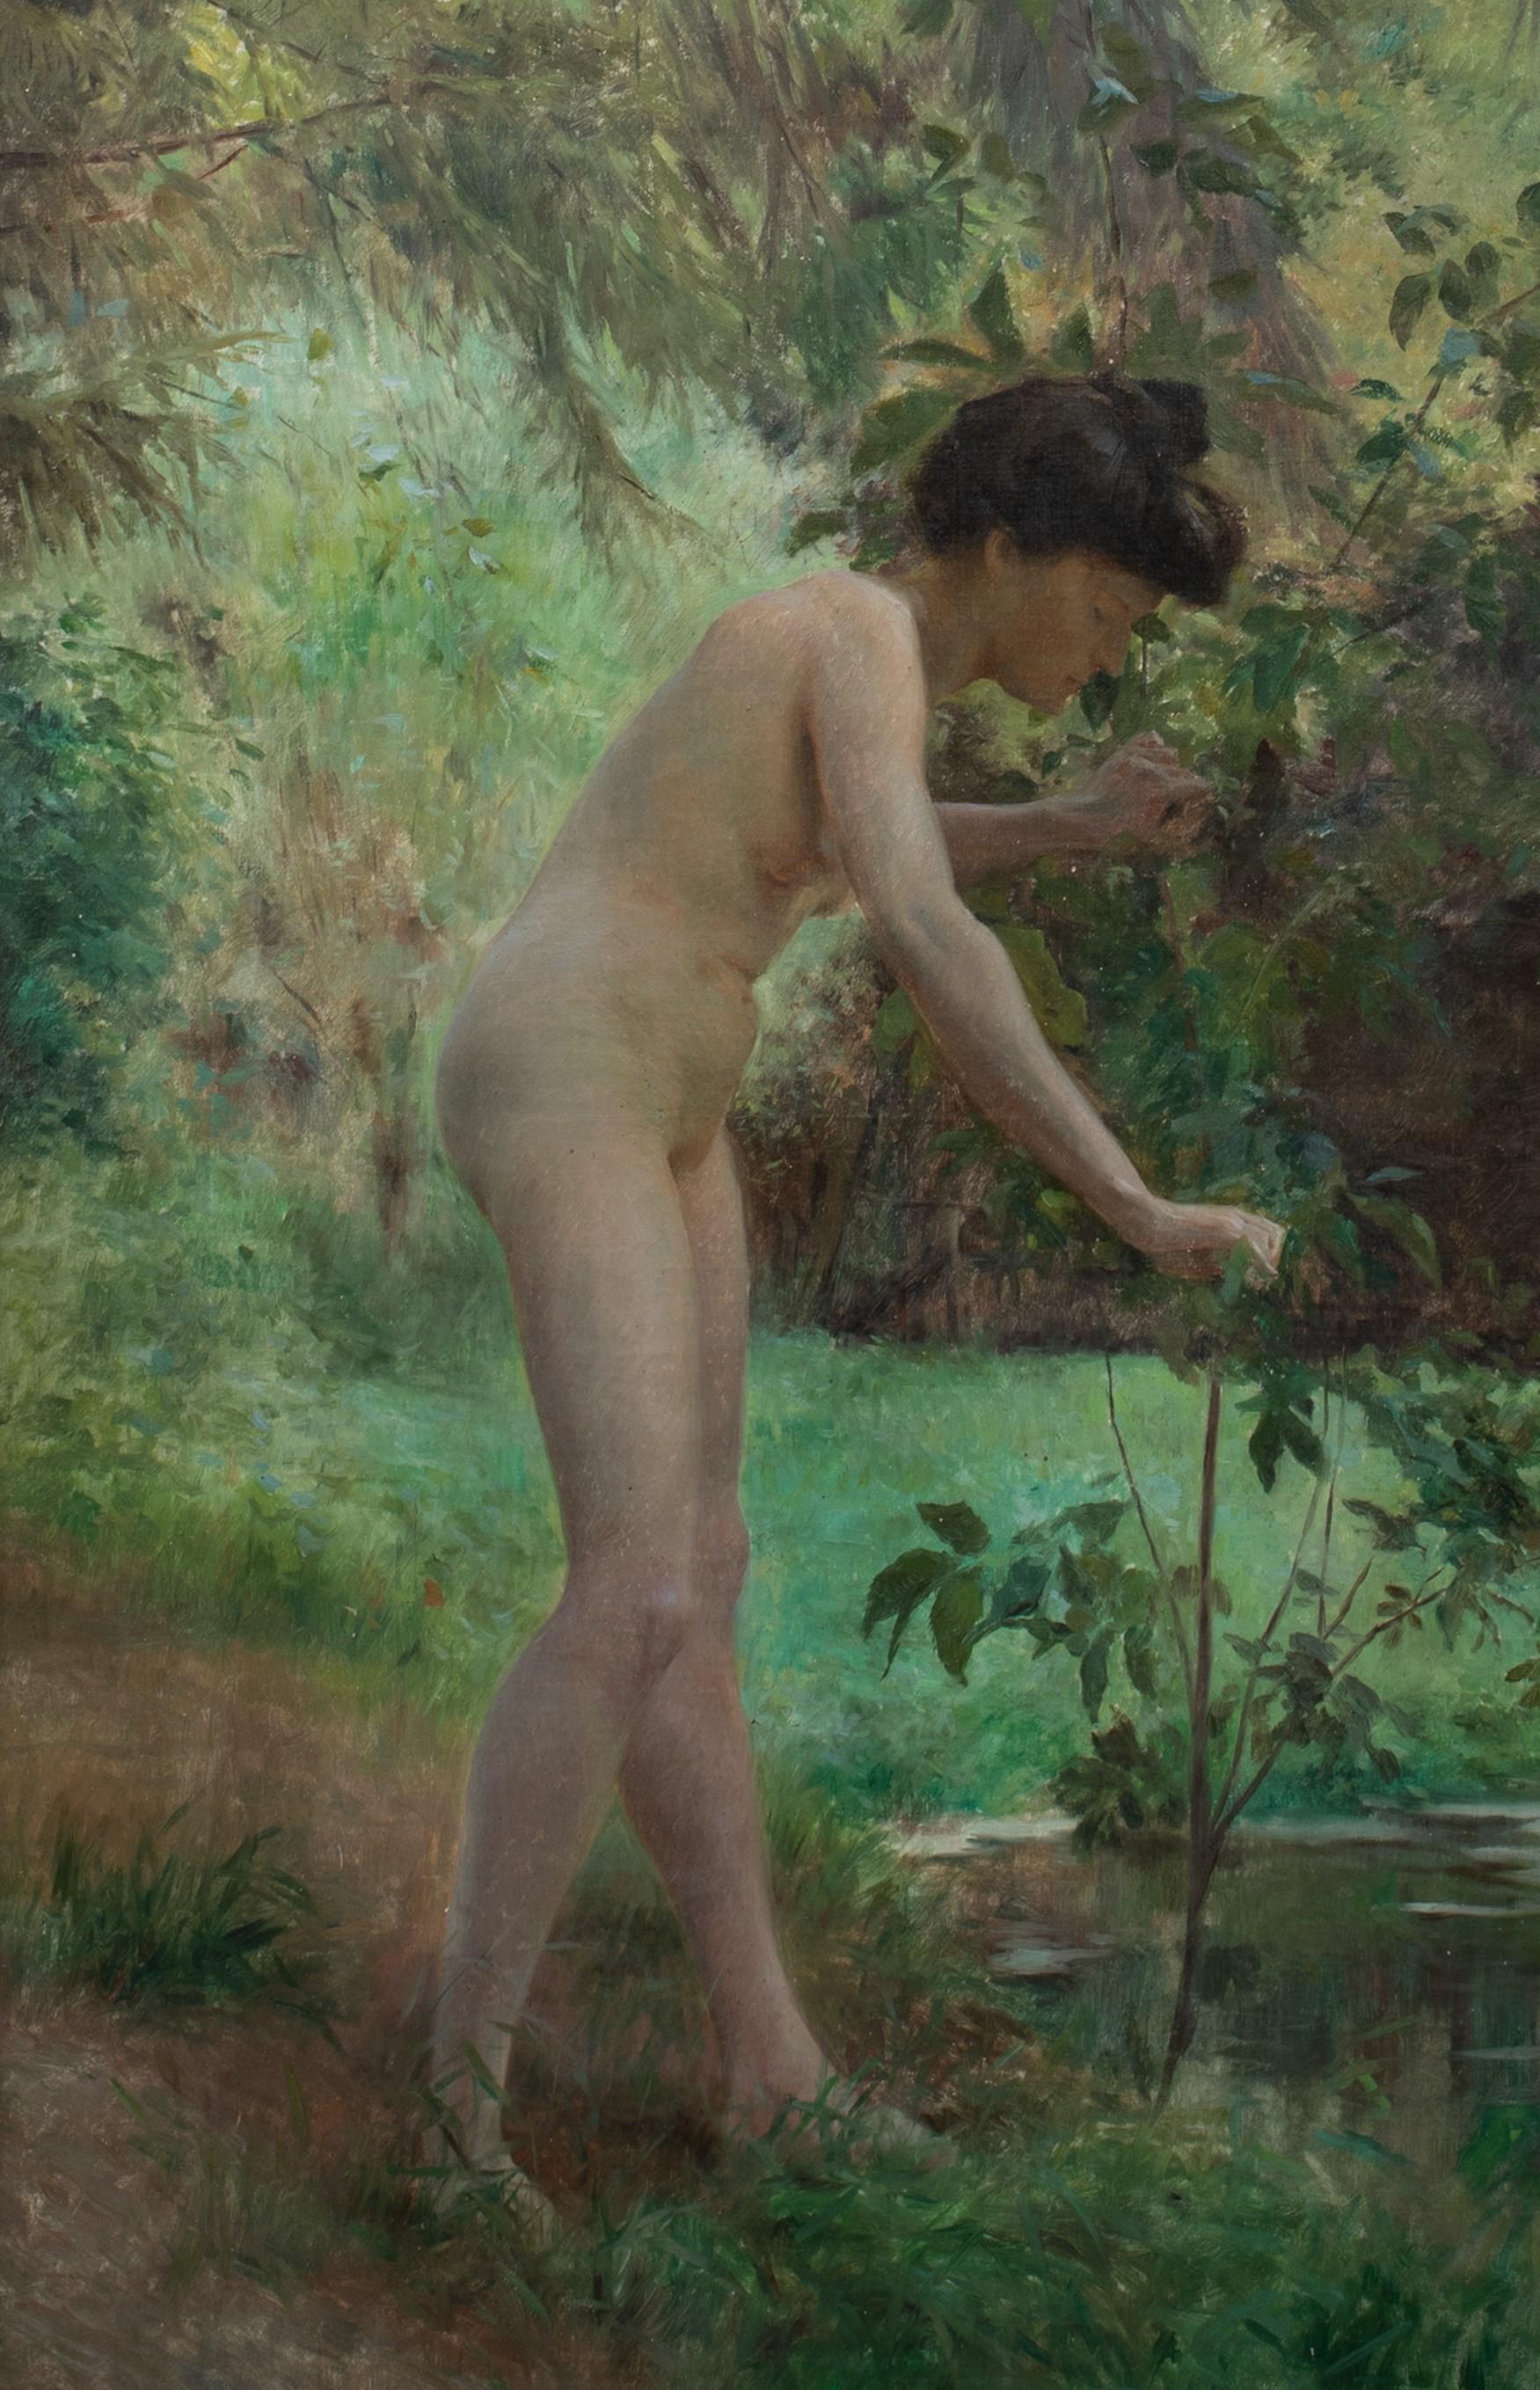 Unknown Portrait Painting - Portrait Of A Nude Woman In A Garden, circa 1905 - Emanuel Phillips Fox 